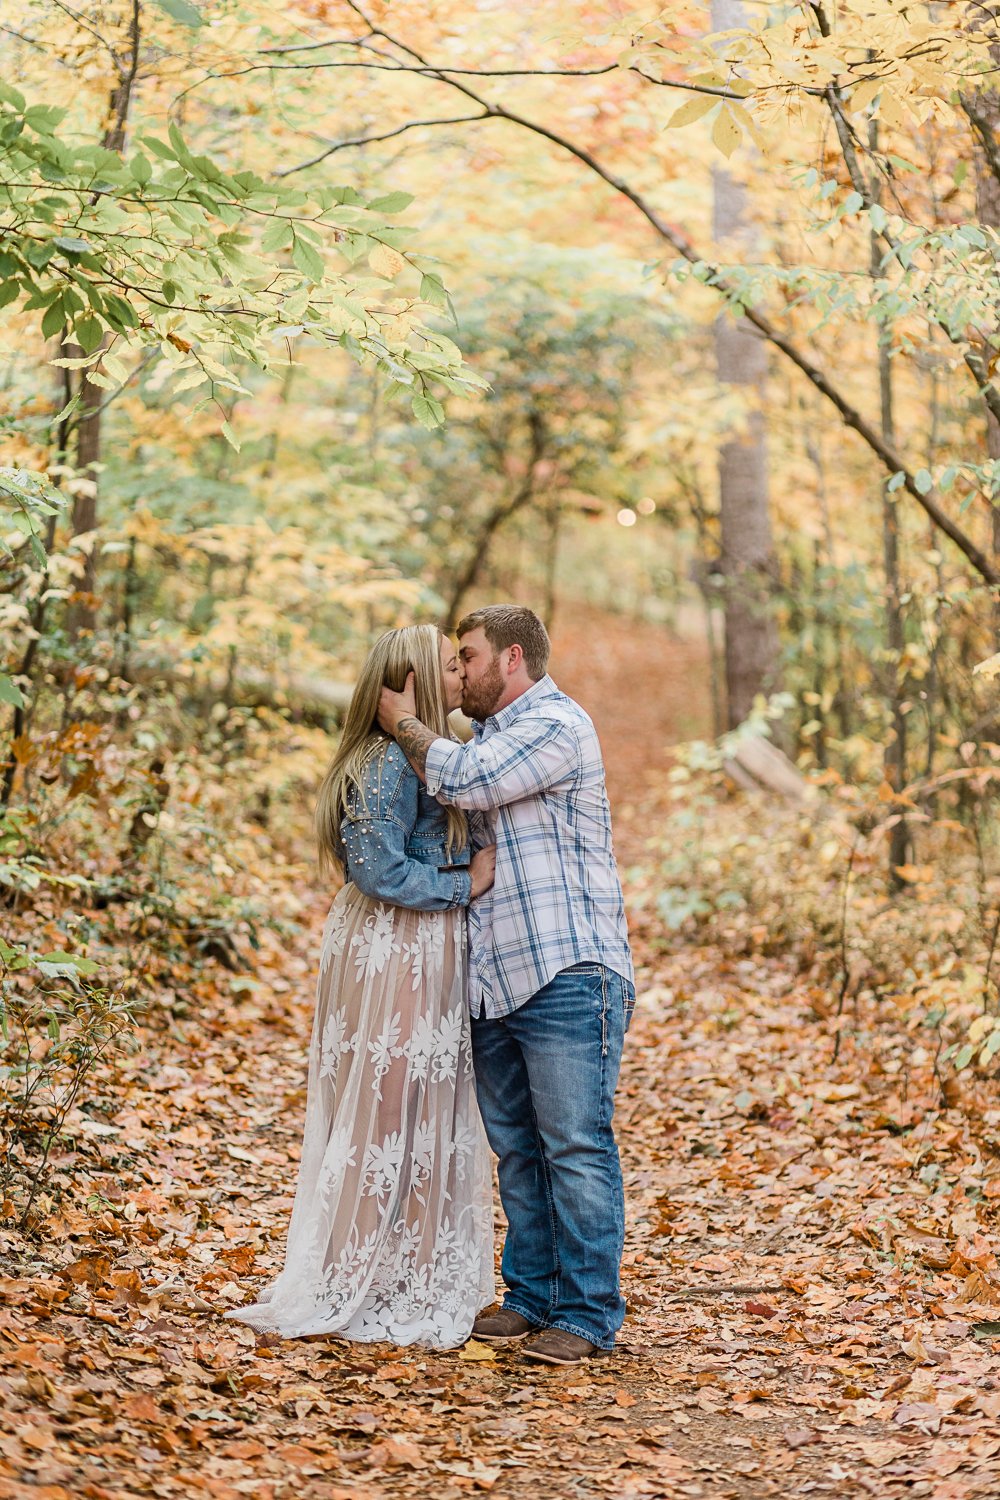 5 of the best places to take engagment photos in greenville sc-4-2.jpg